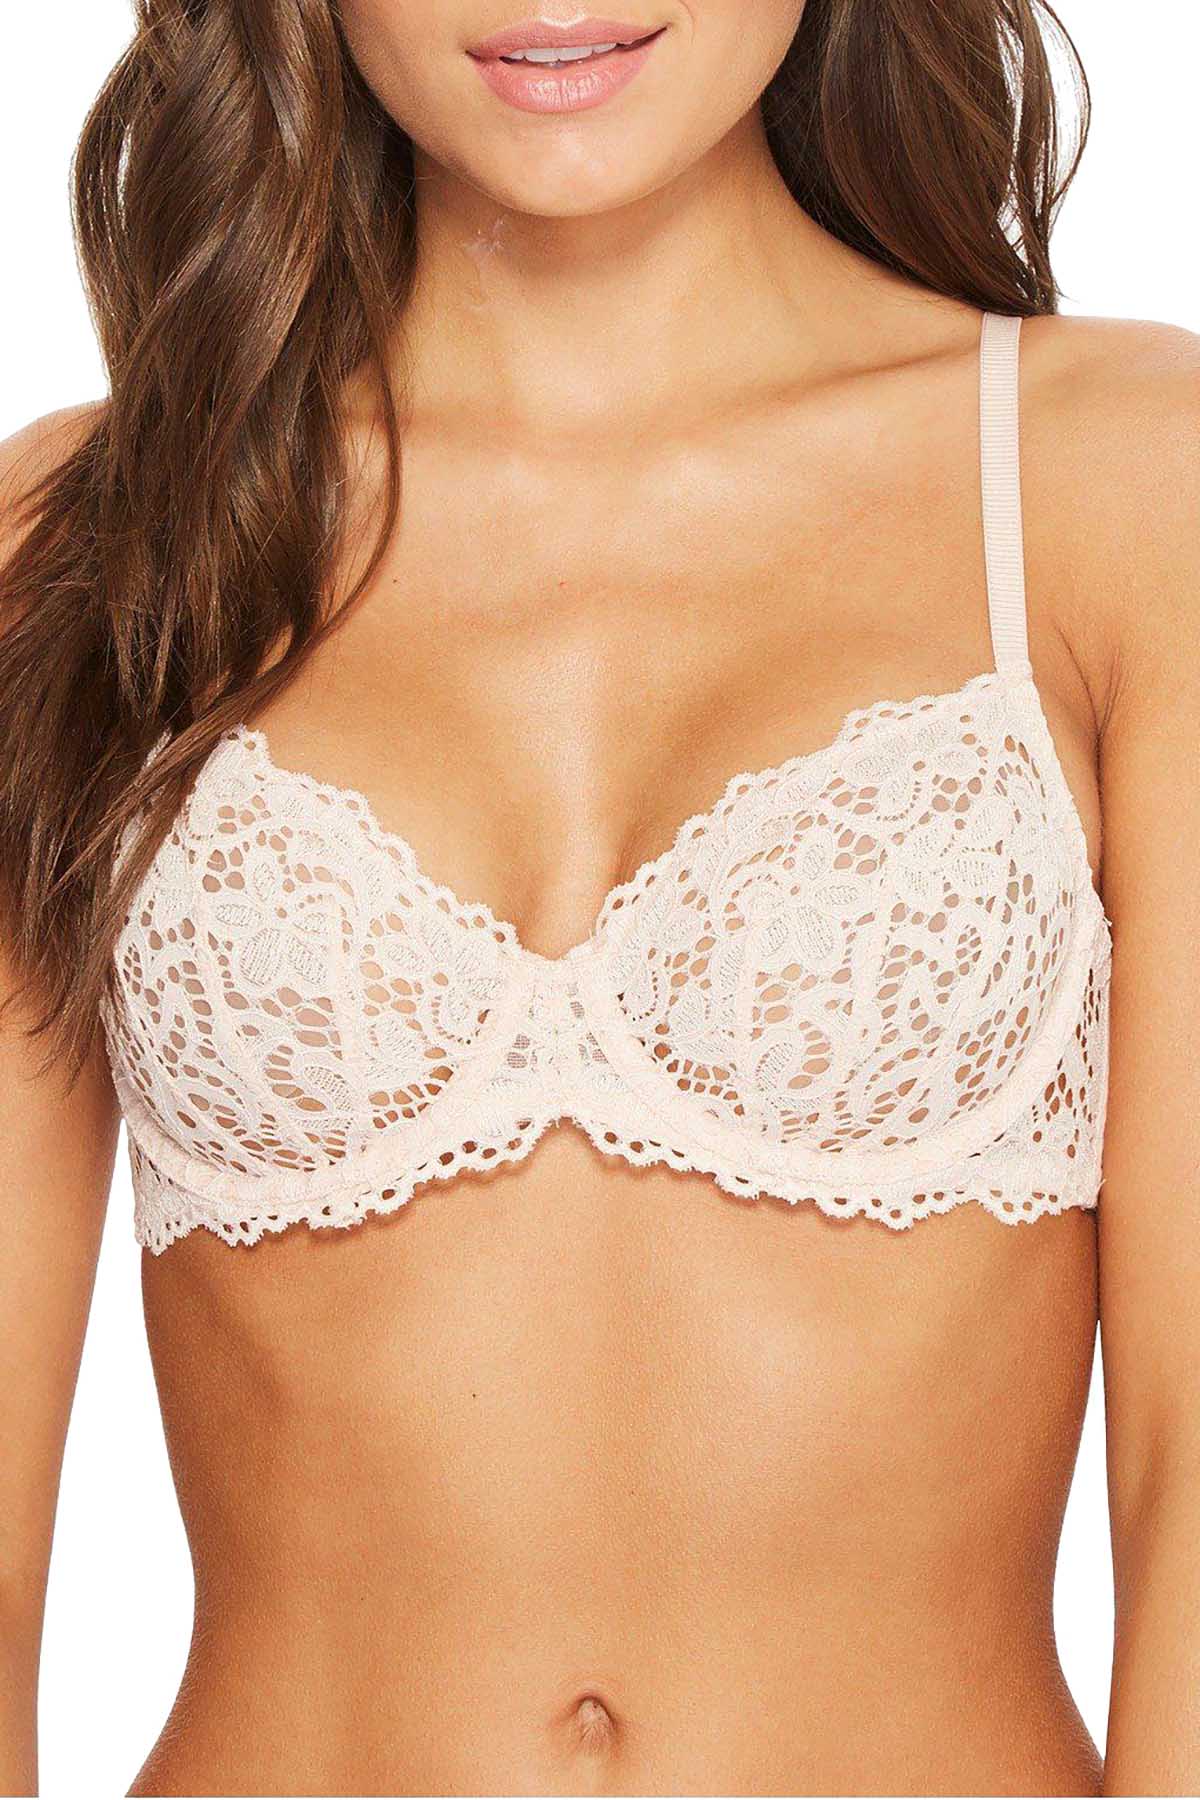 DKNY Classic Lace Bralette